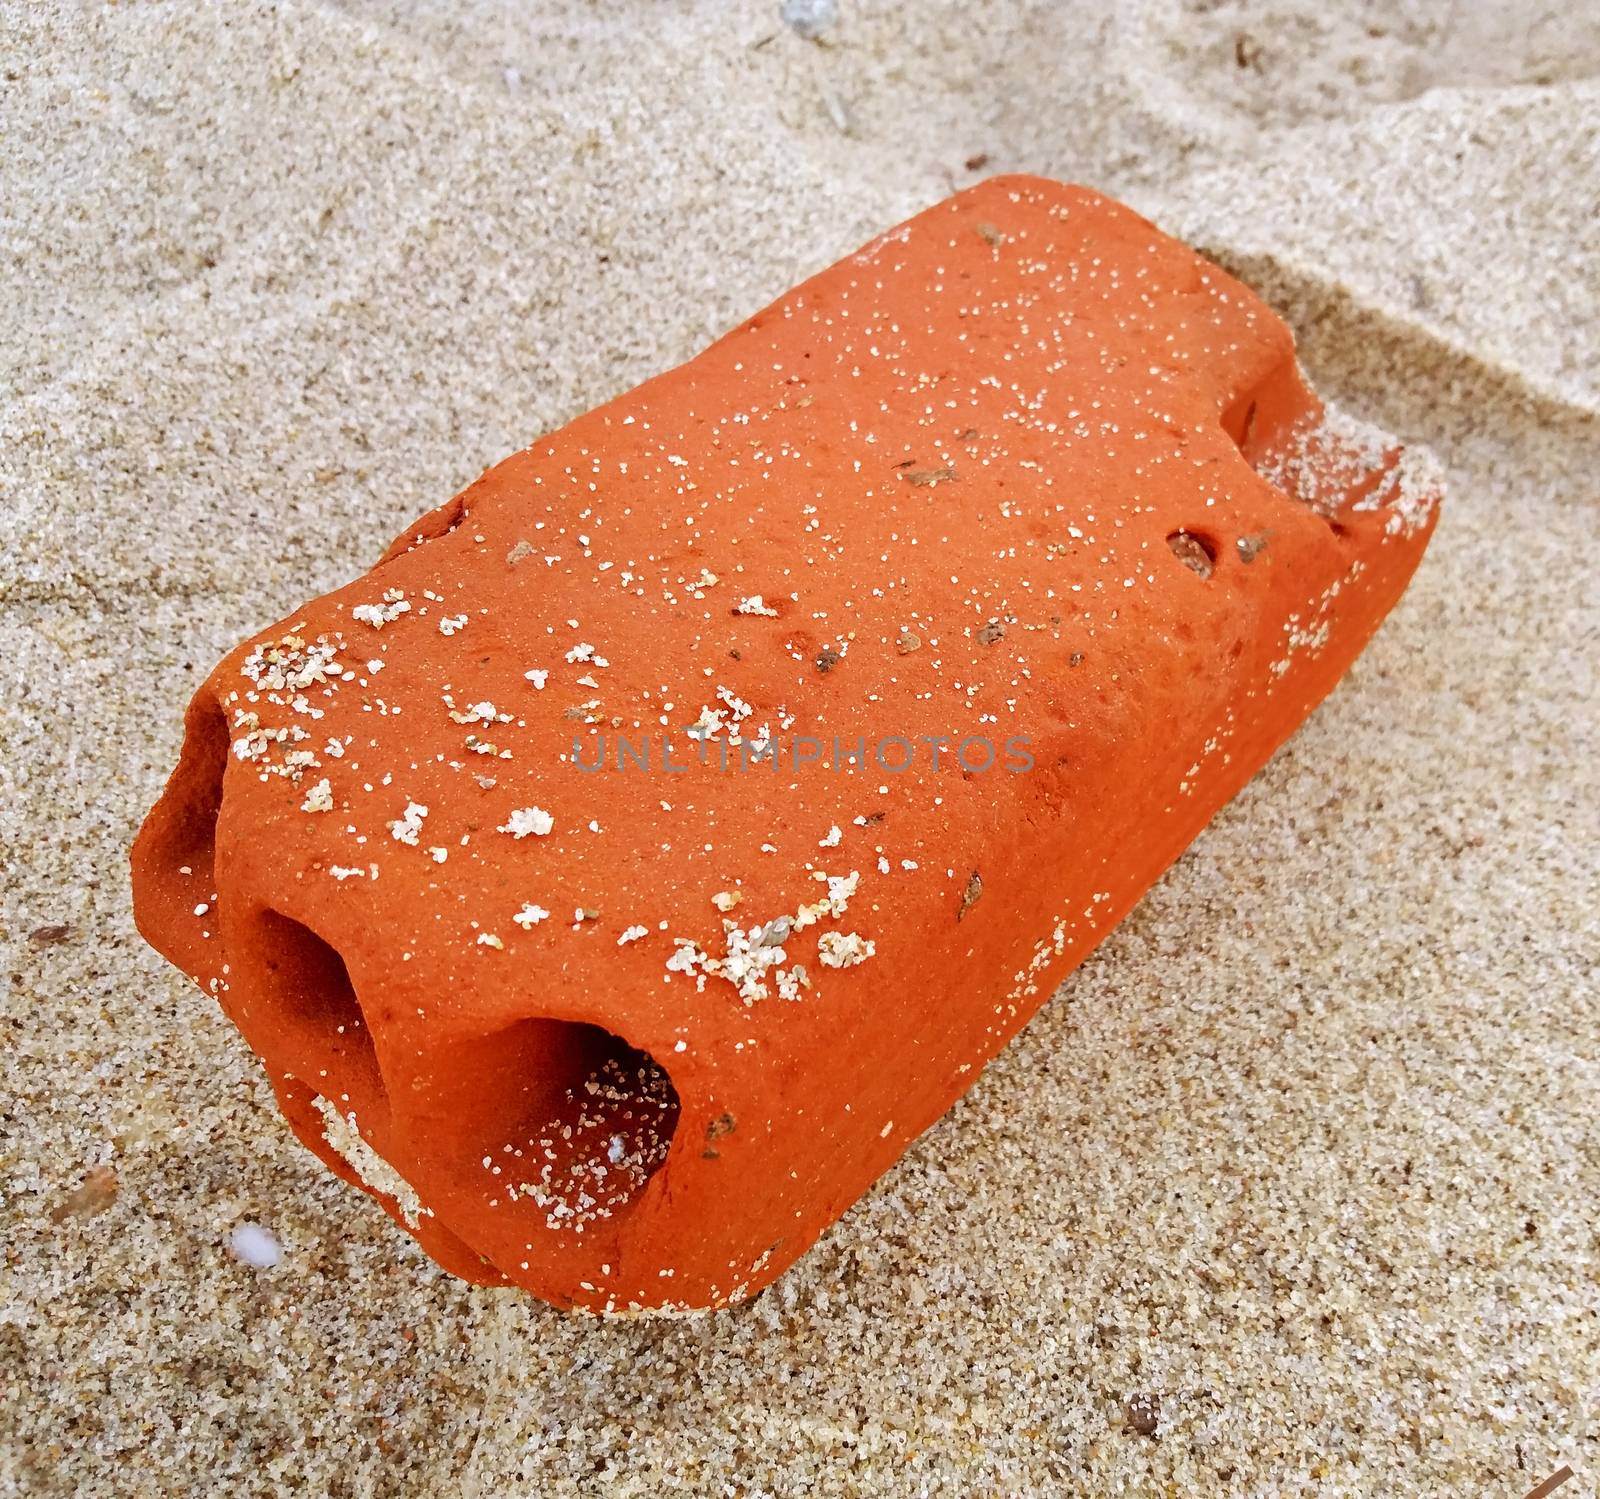 Brick polished by the sea, on the sandy beach by Mindru